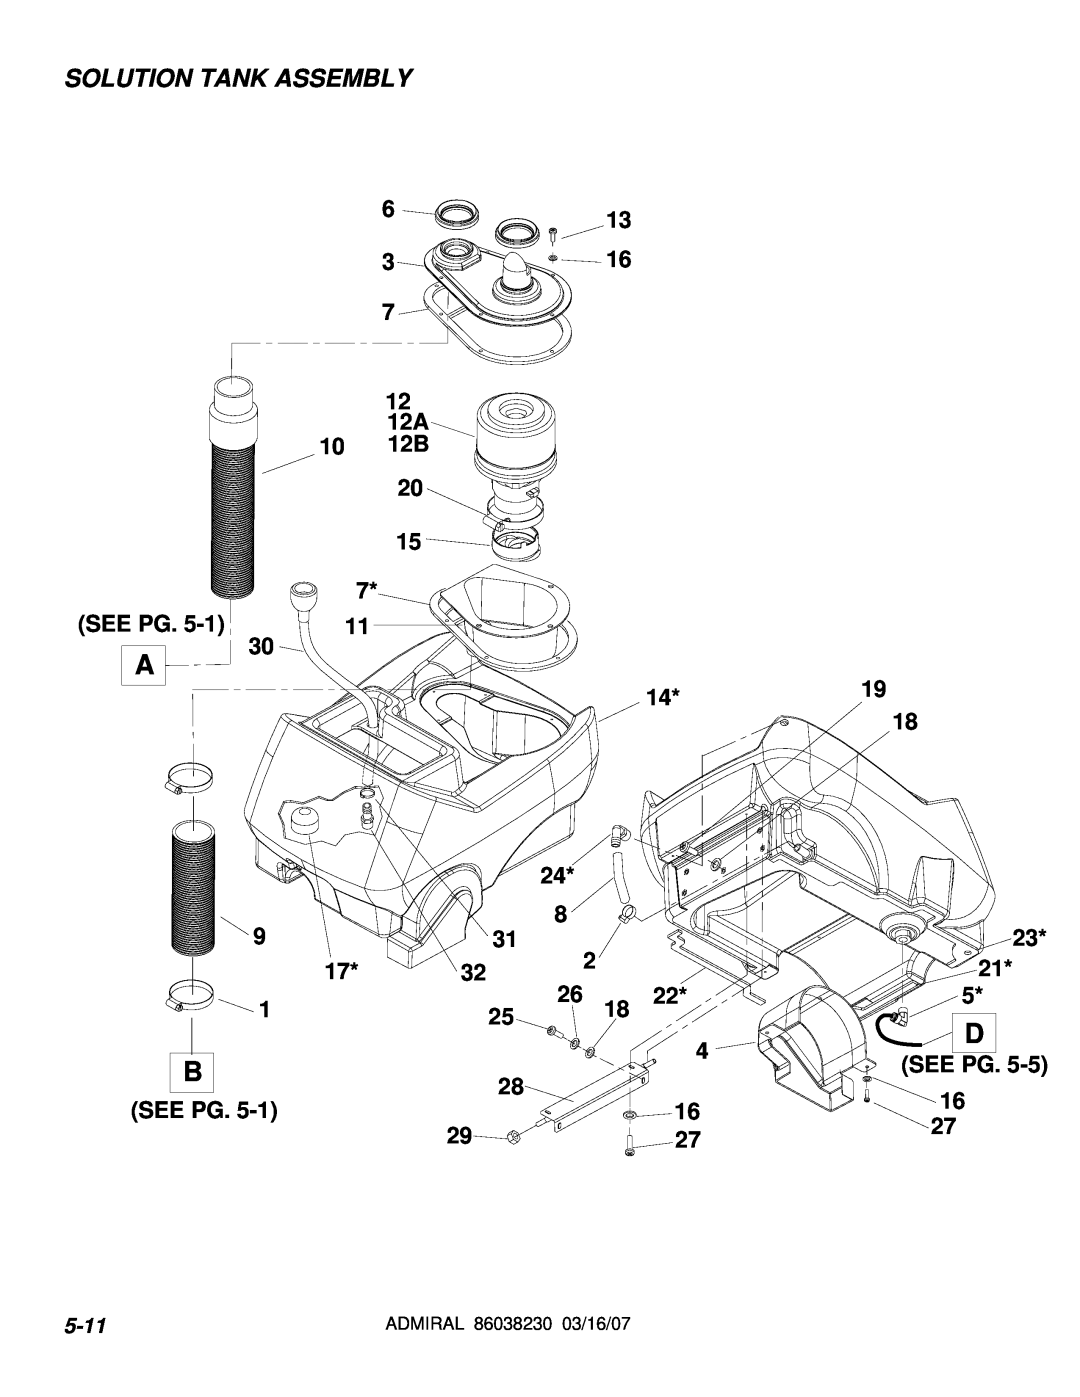 Windsor ADM8, 10080170 operating instructions Solution Tank Assembly, 12 12A 10 12B, See Pg, 20 15 7 11 14*19 